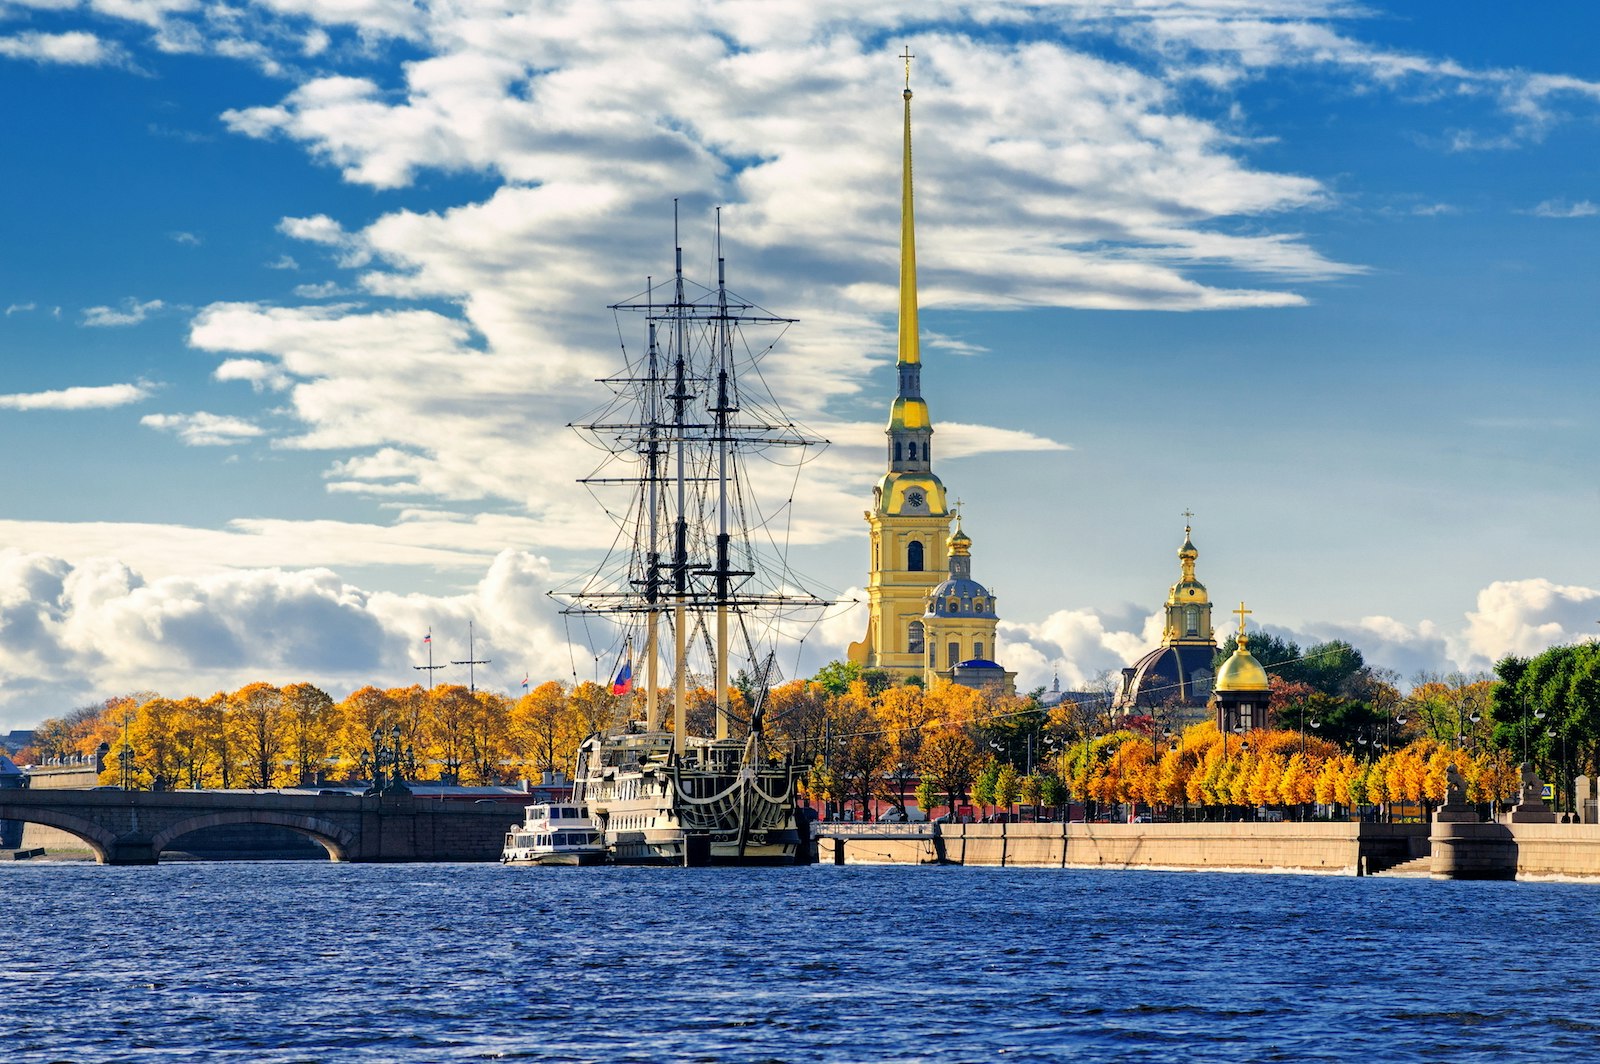 Sailing ship anchored by the Peter and Paul Fortress, with orange-leaved trees lining the coast